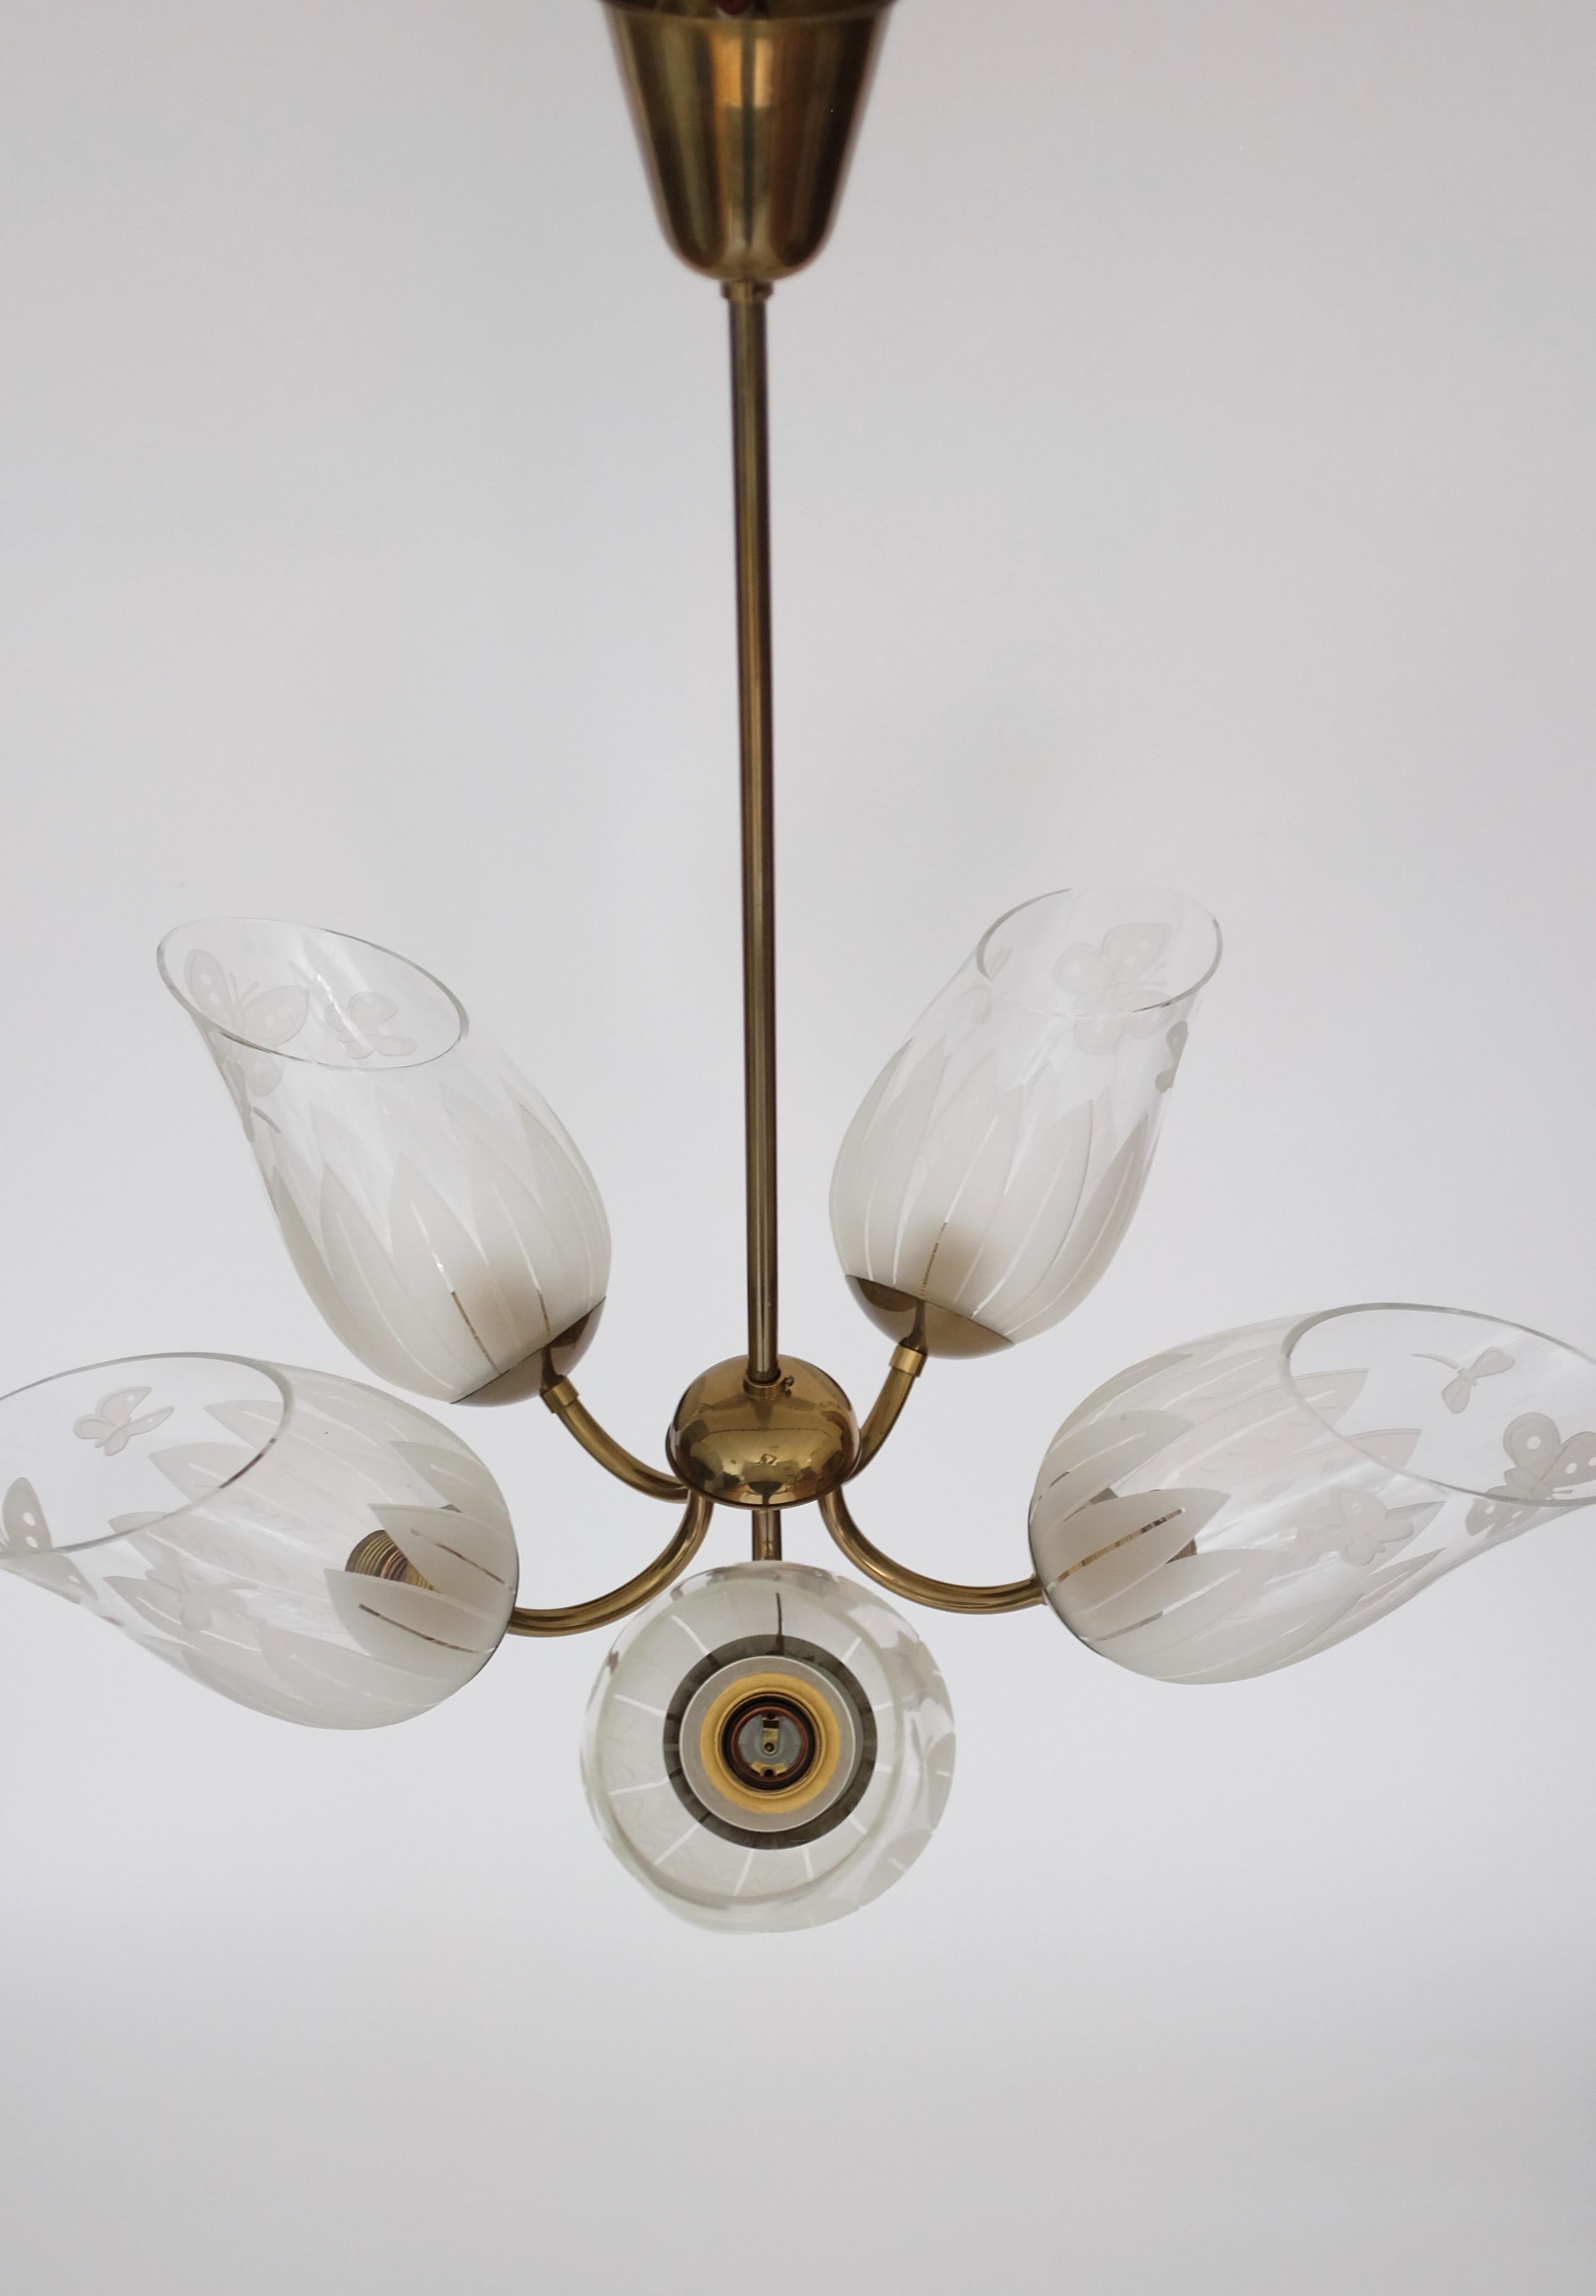 Impressive Glass and Brass Chandelier by Bo Notini for Glössner, Sweden, from the 1940s. Consisting of 5 individual lamp arms with beautiful glass etched lanterns with organic leaf and butterflies details. In a very good condition with the brass in